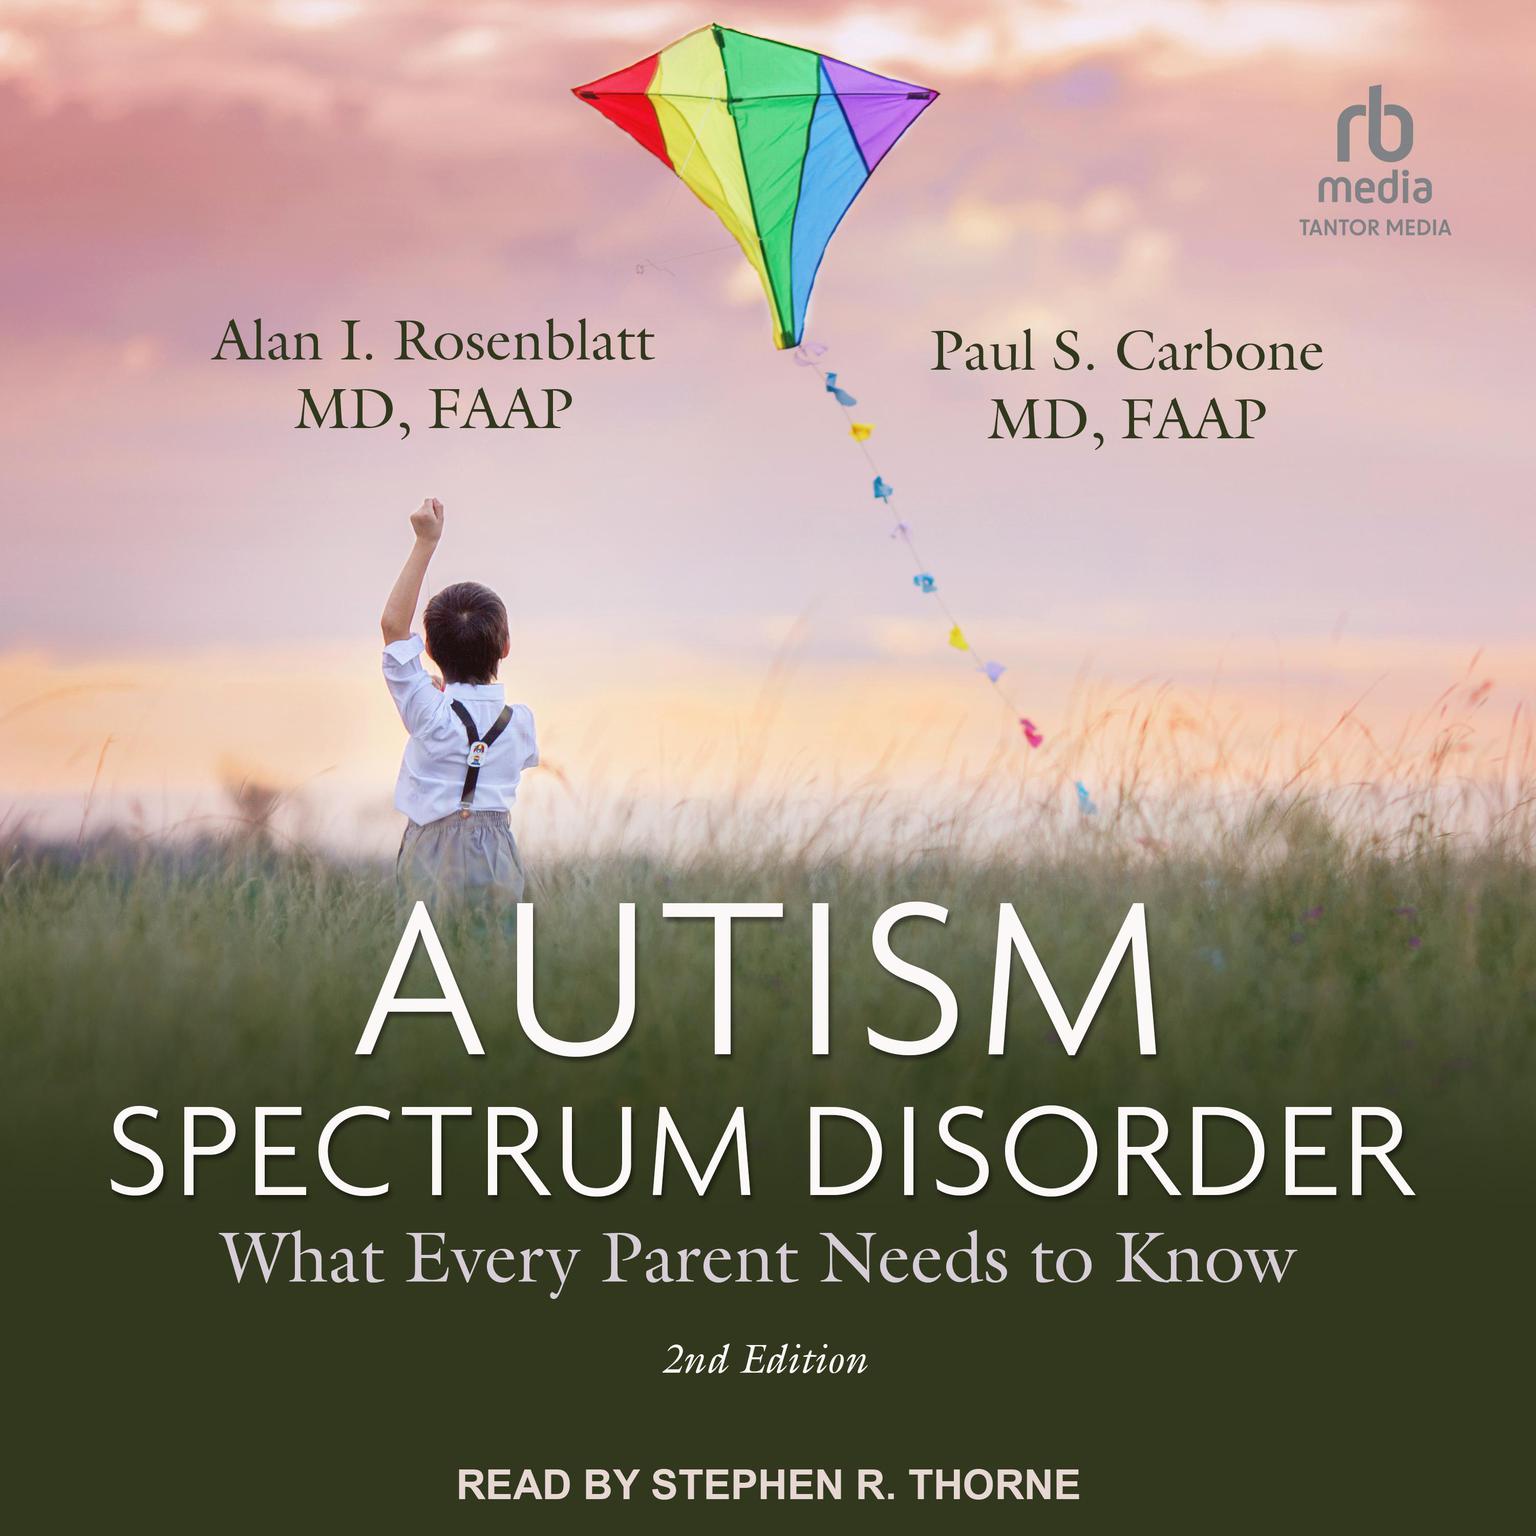 Autism Spectrum Disorder: 2nd Edition: What Every Parent Needs to Know Audiobook, by Alan I. Rosenblatt, MD, FAAP